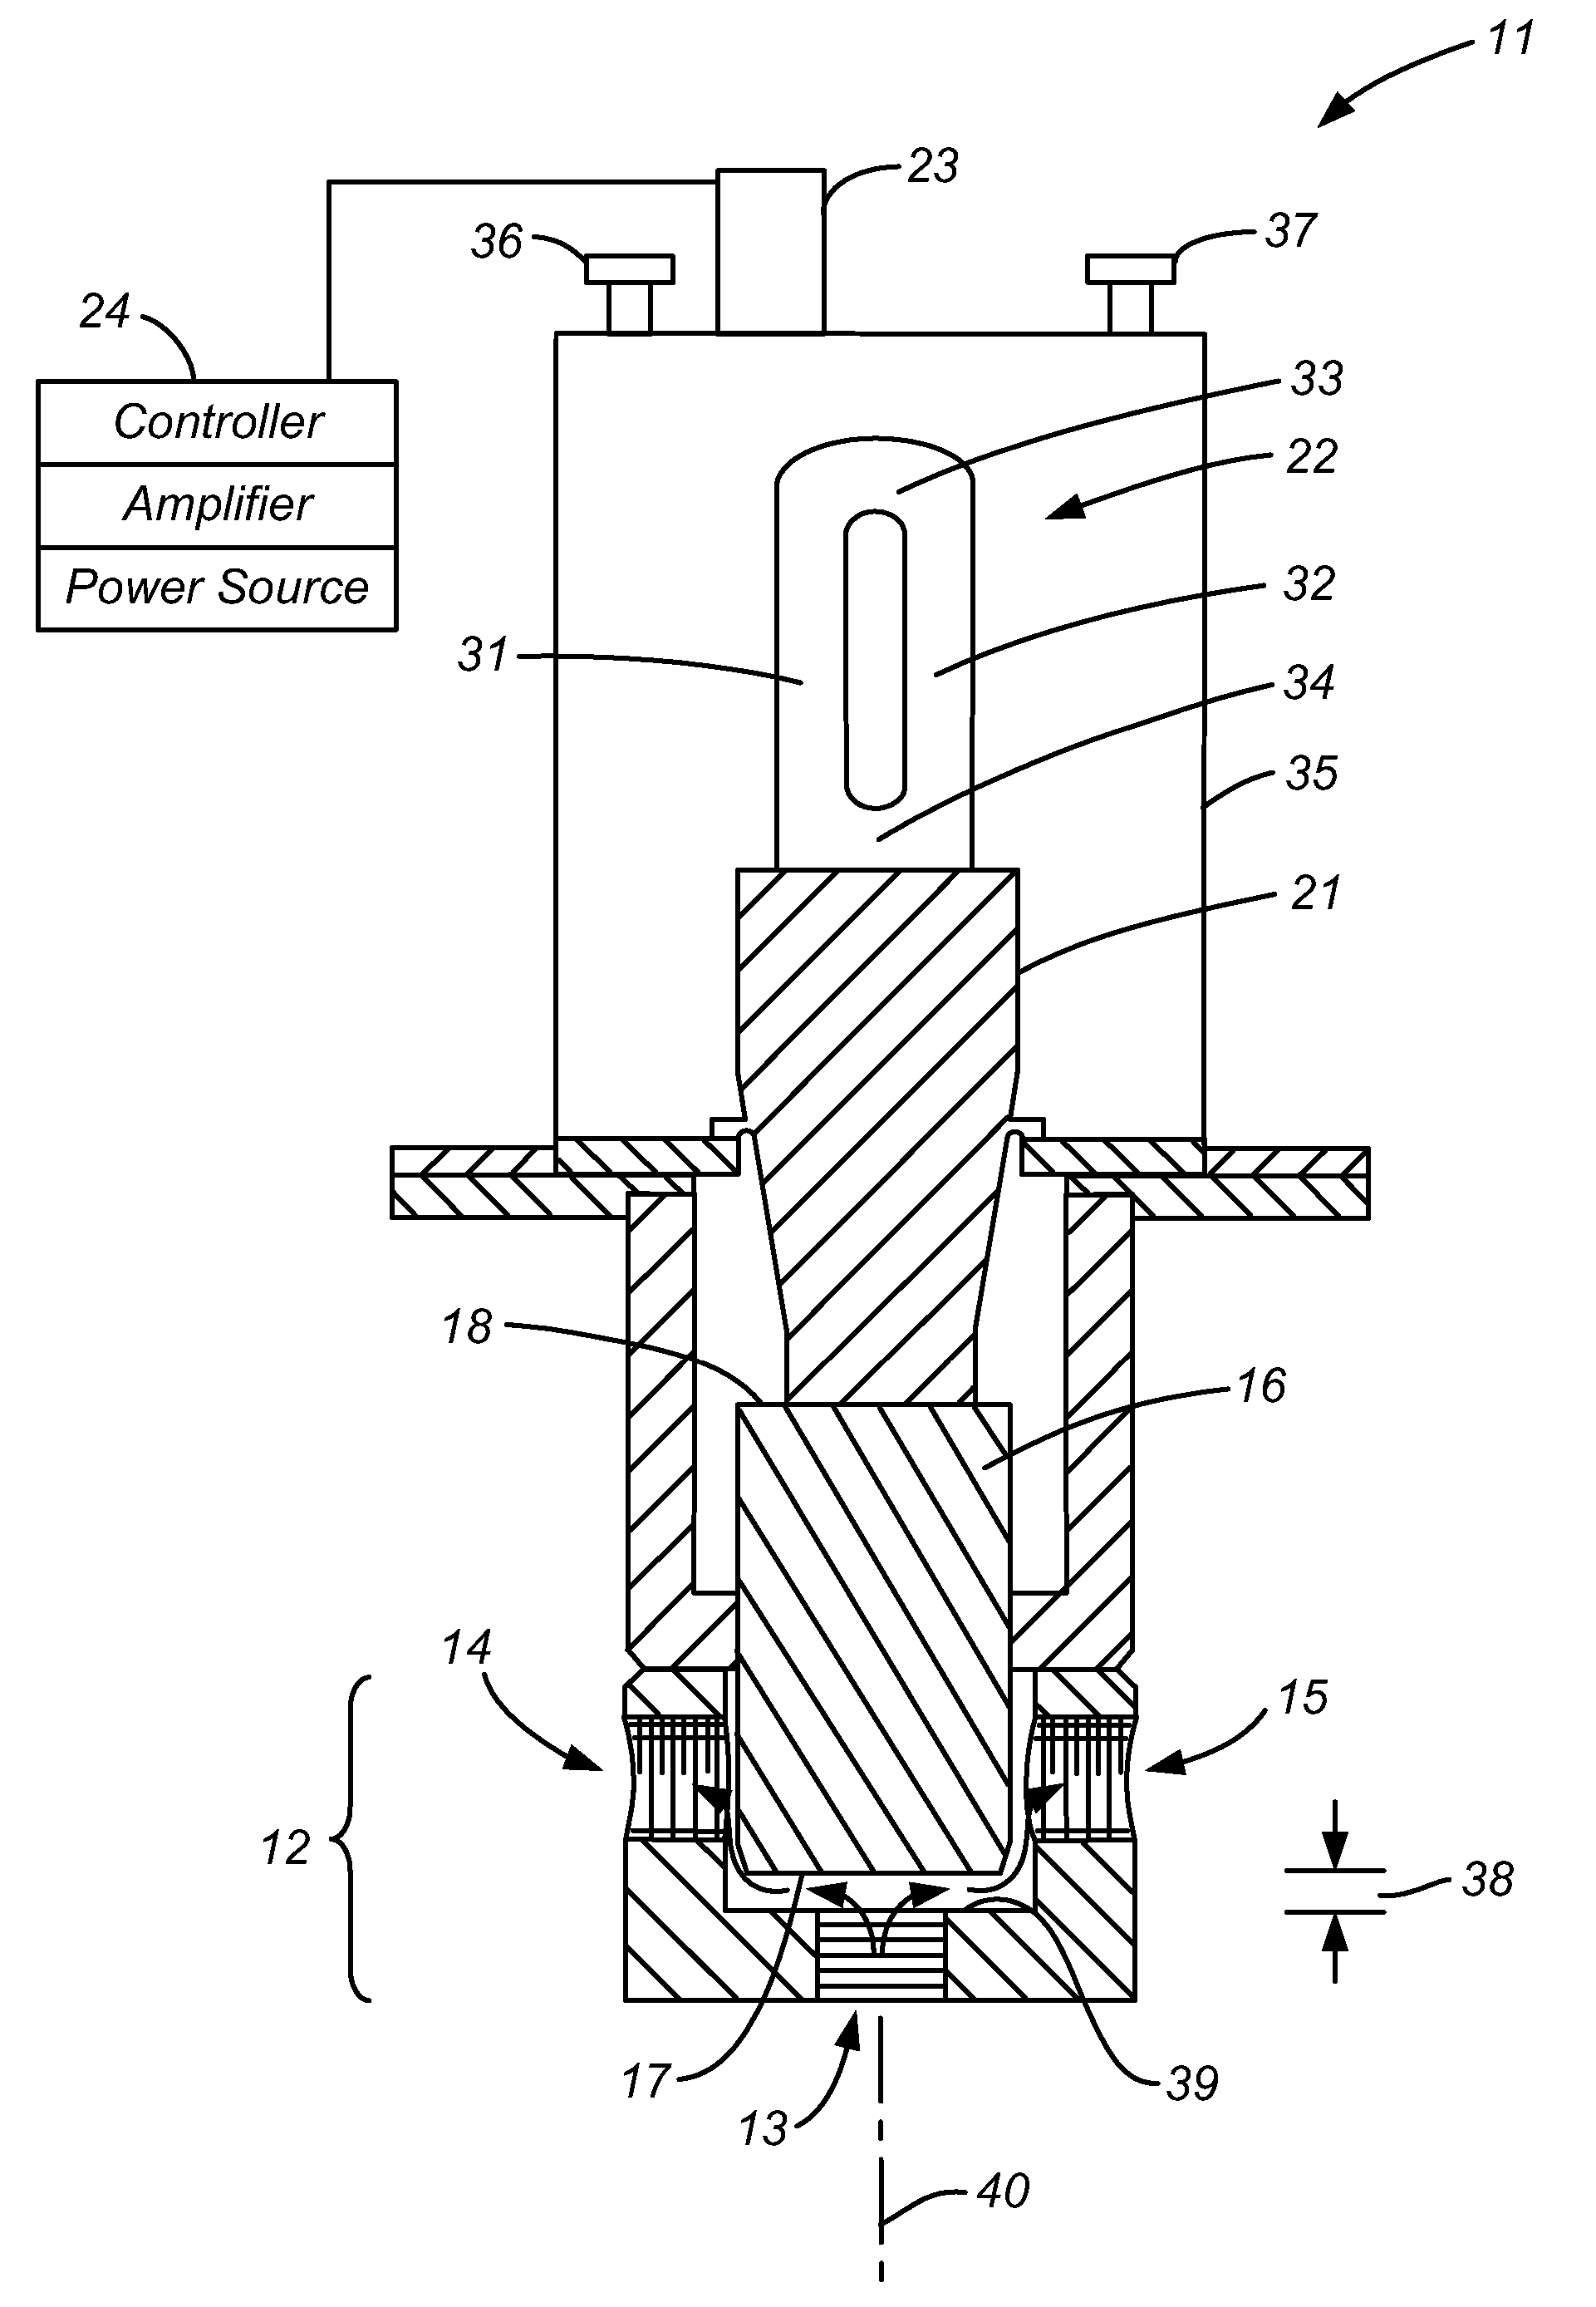 Loop-shaped ultrasound generator and use in reaction systems